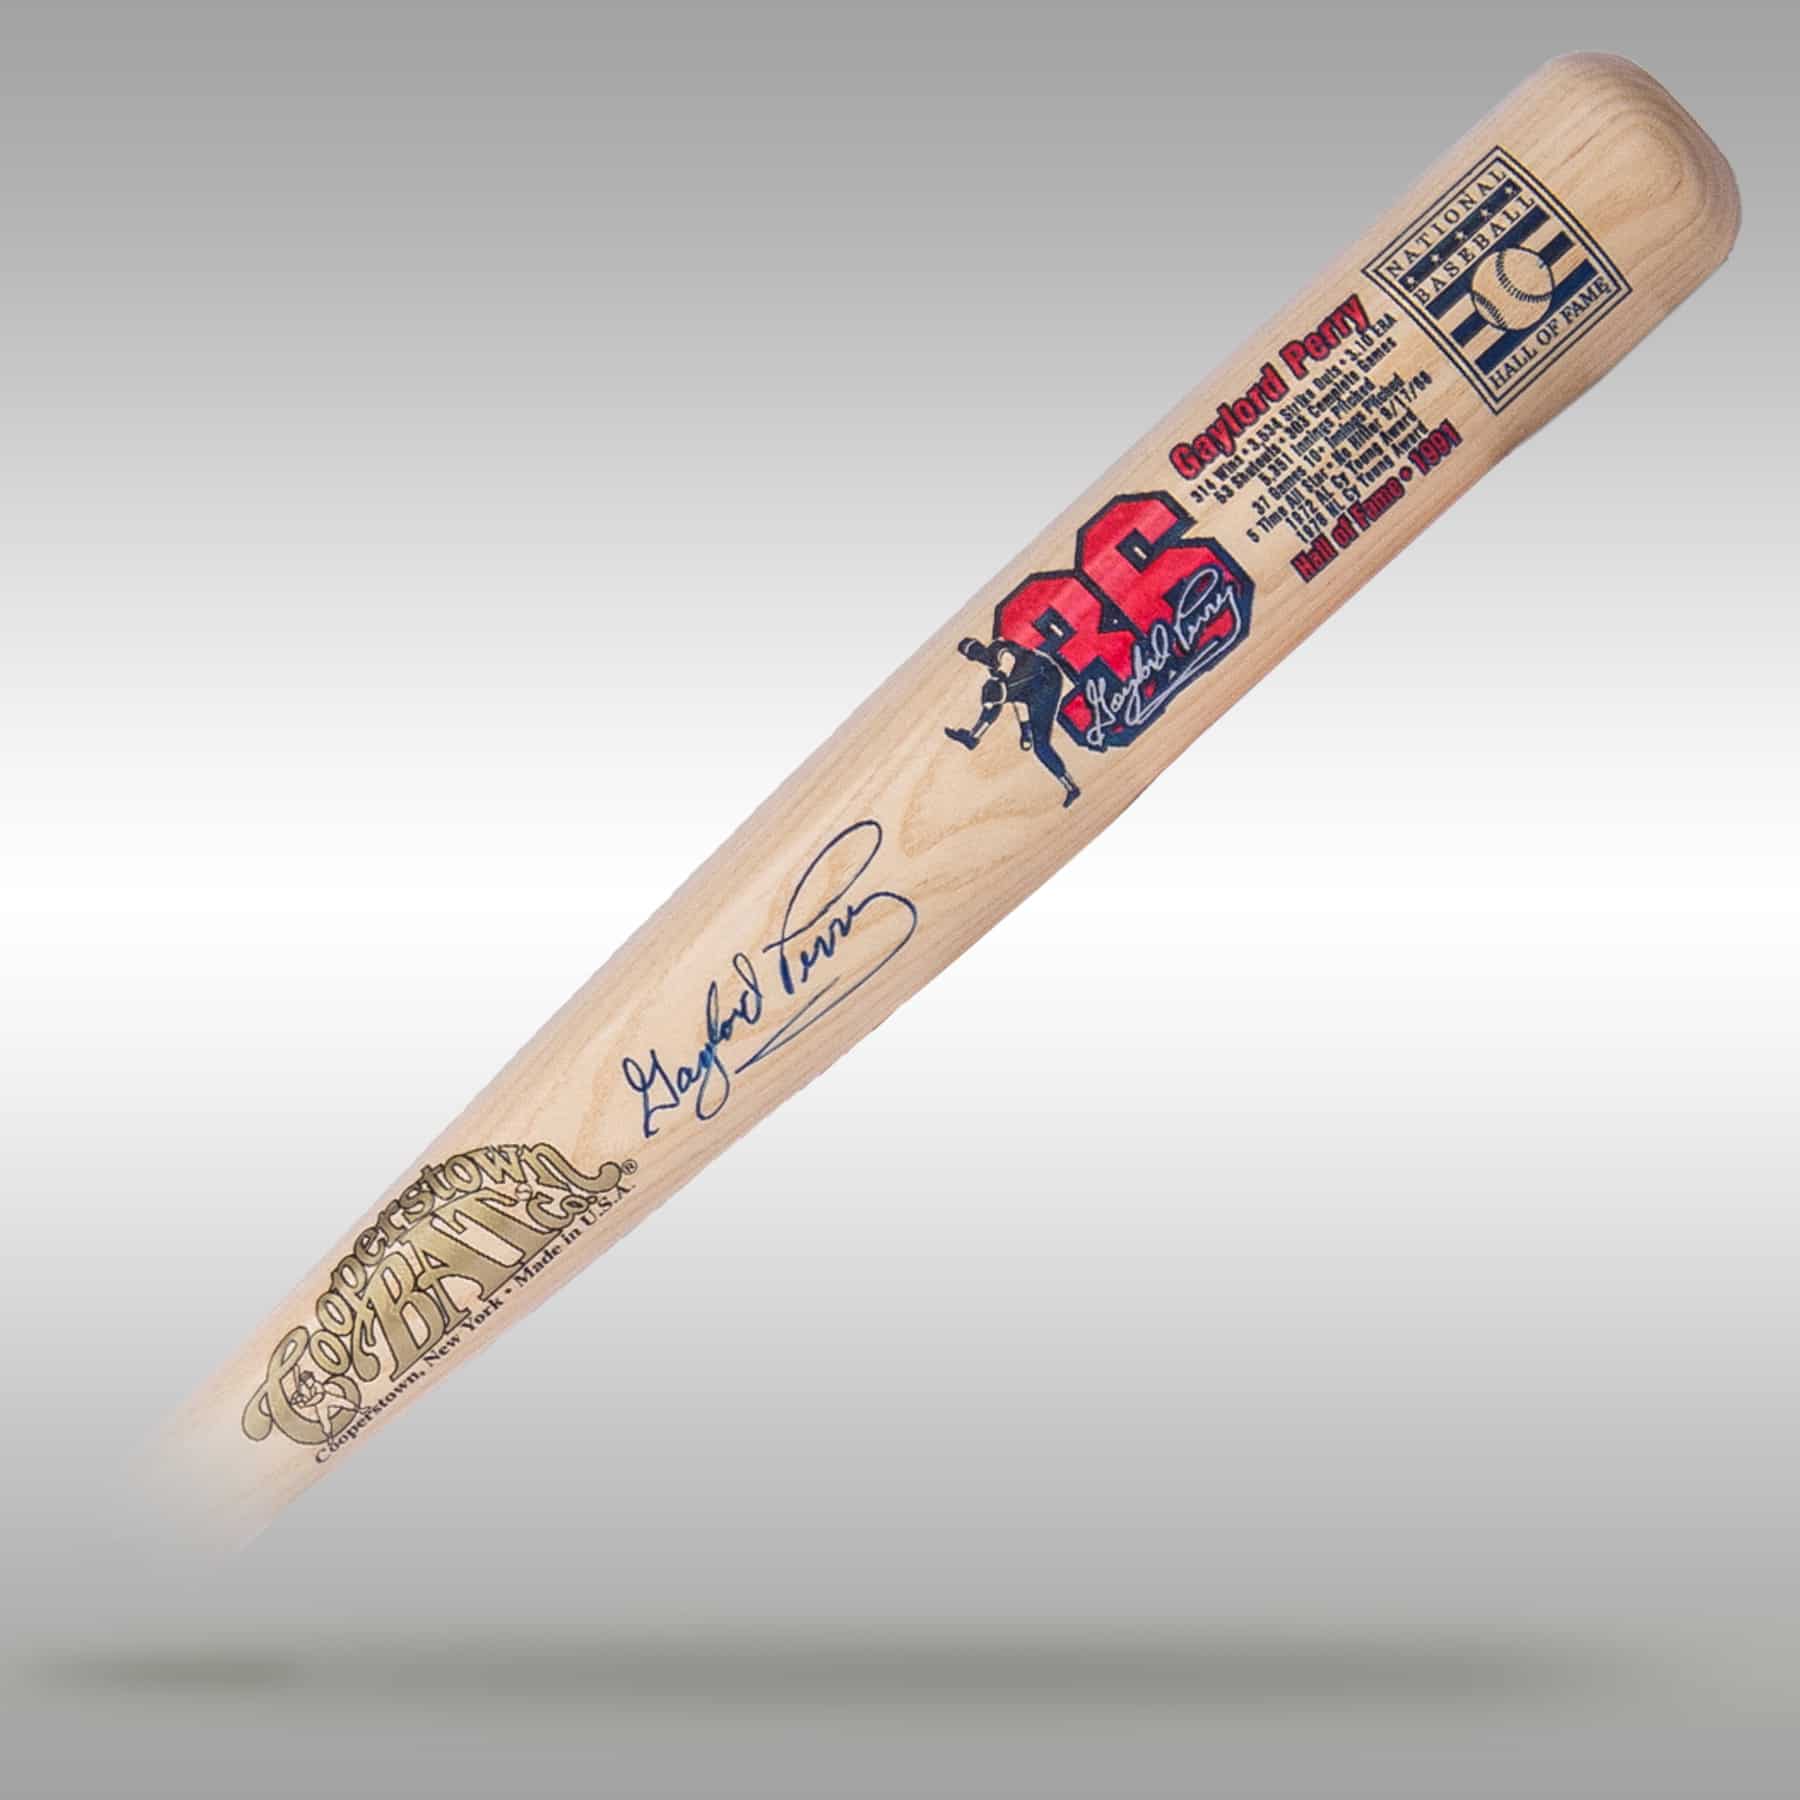 Gaylord Perry autographed National Baseball Hall of Fame™ stats bat